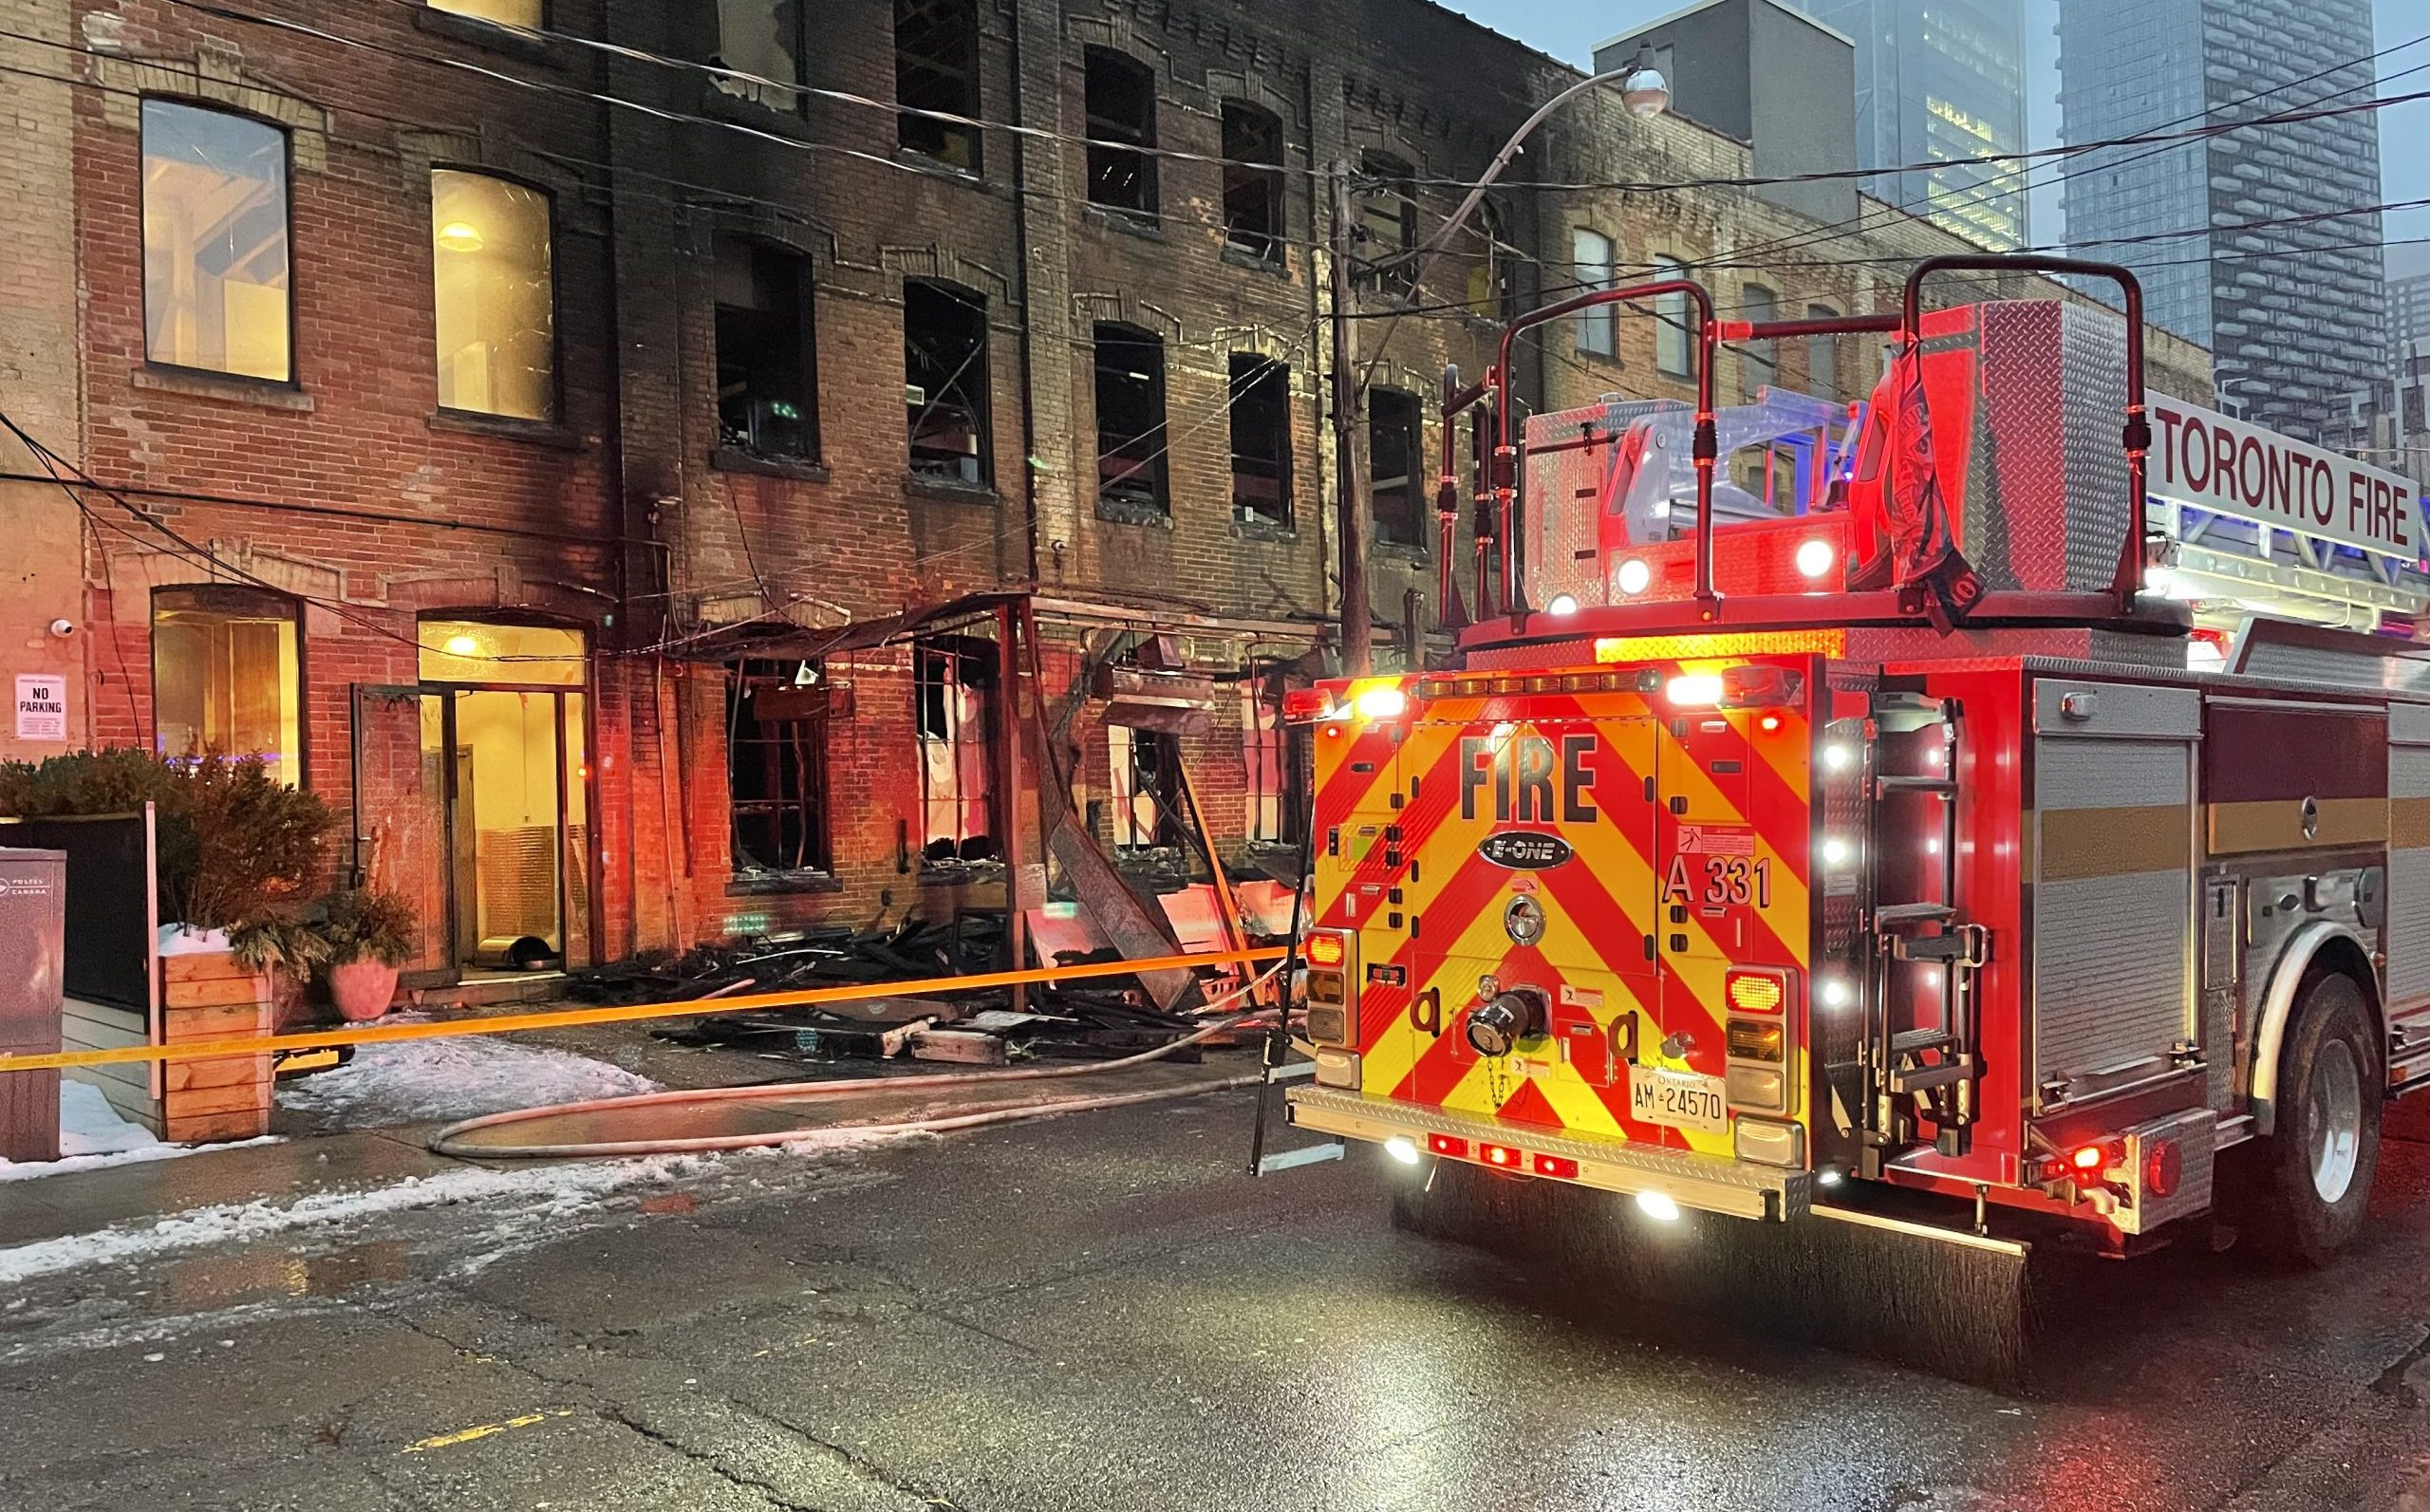 Downtown Toronto restaurant fire believed to be arson police